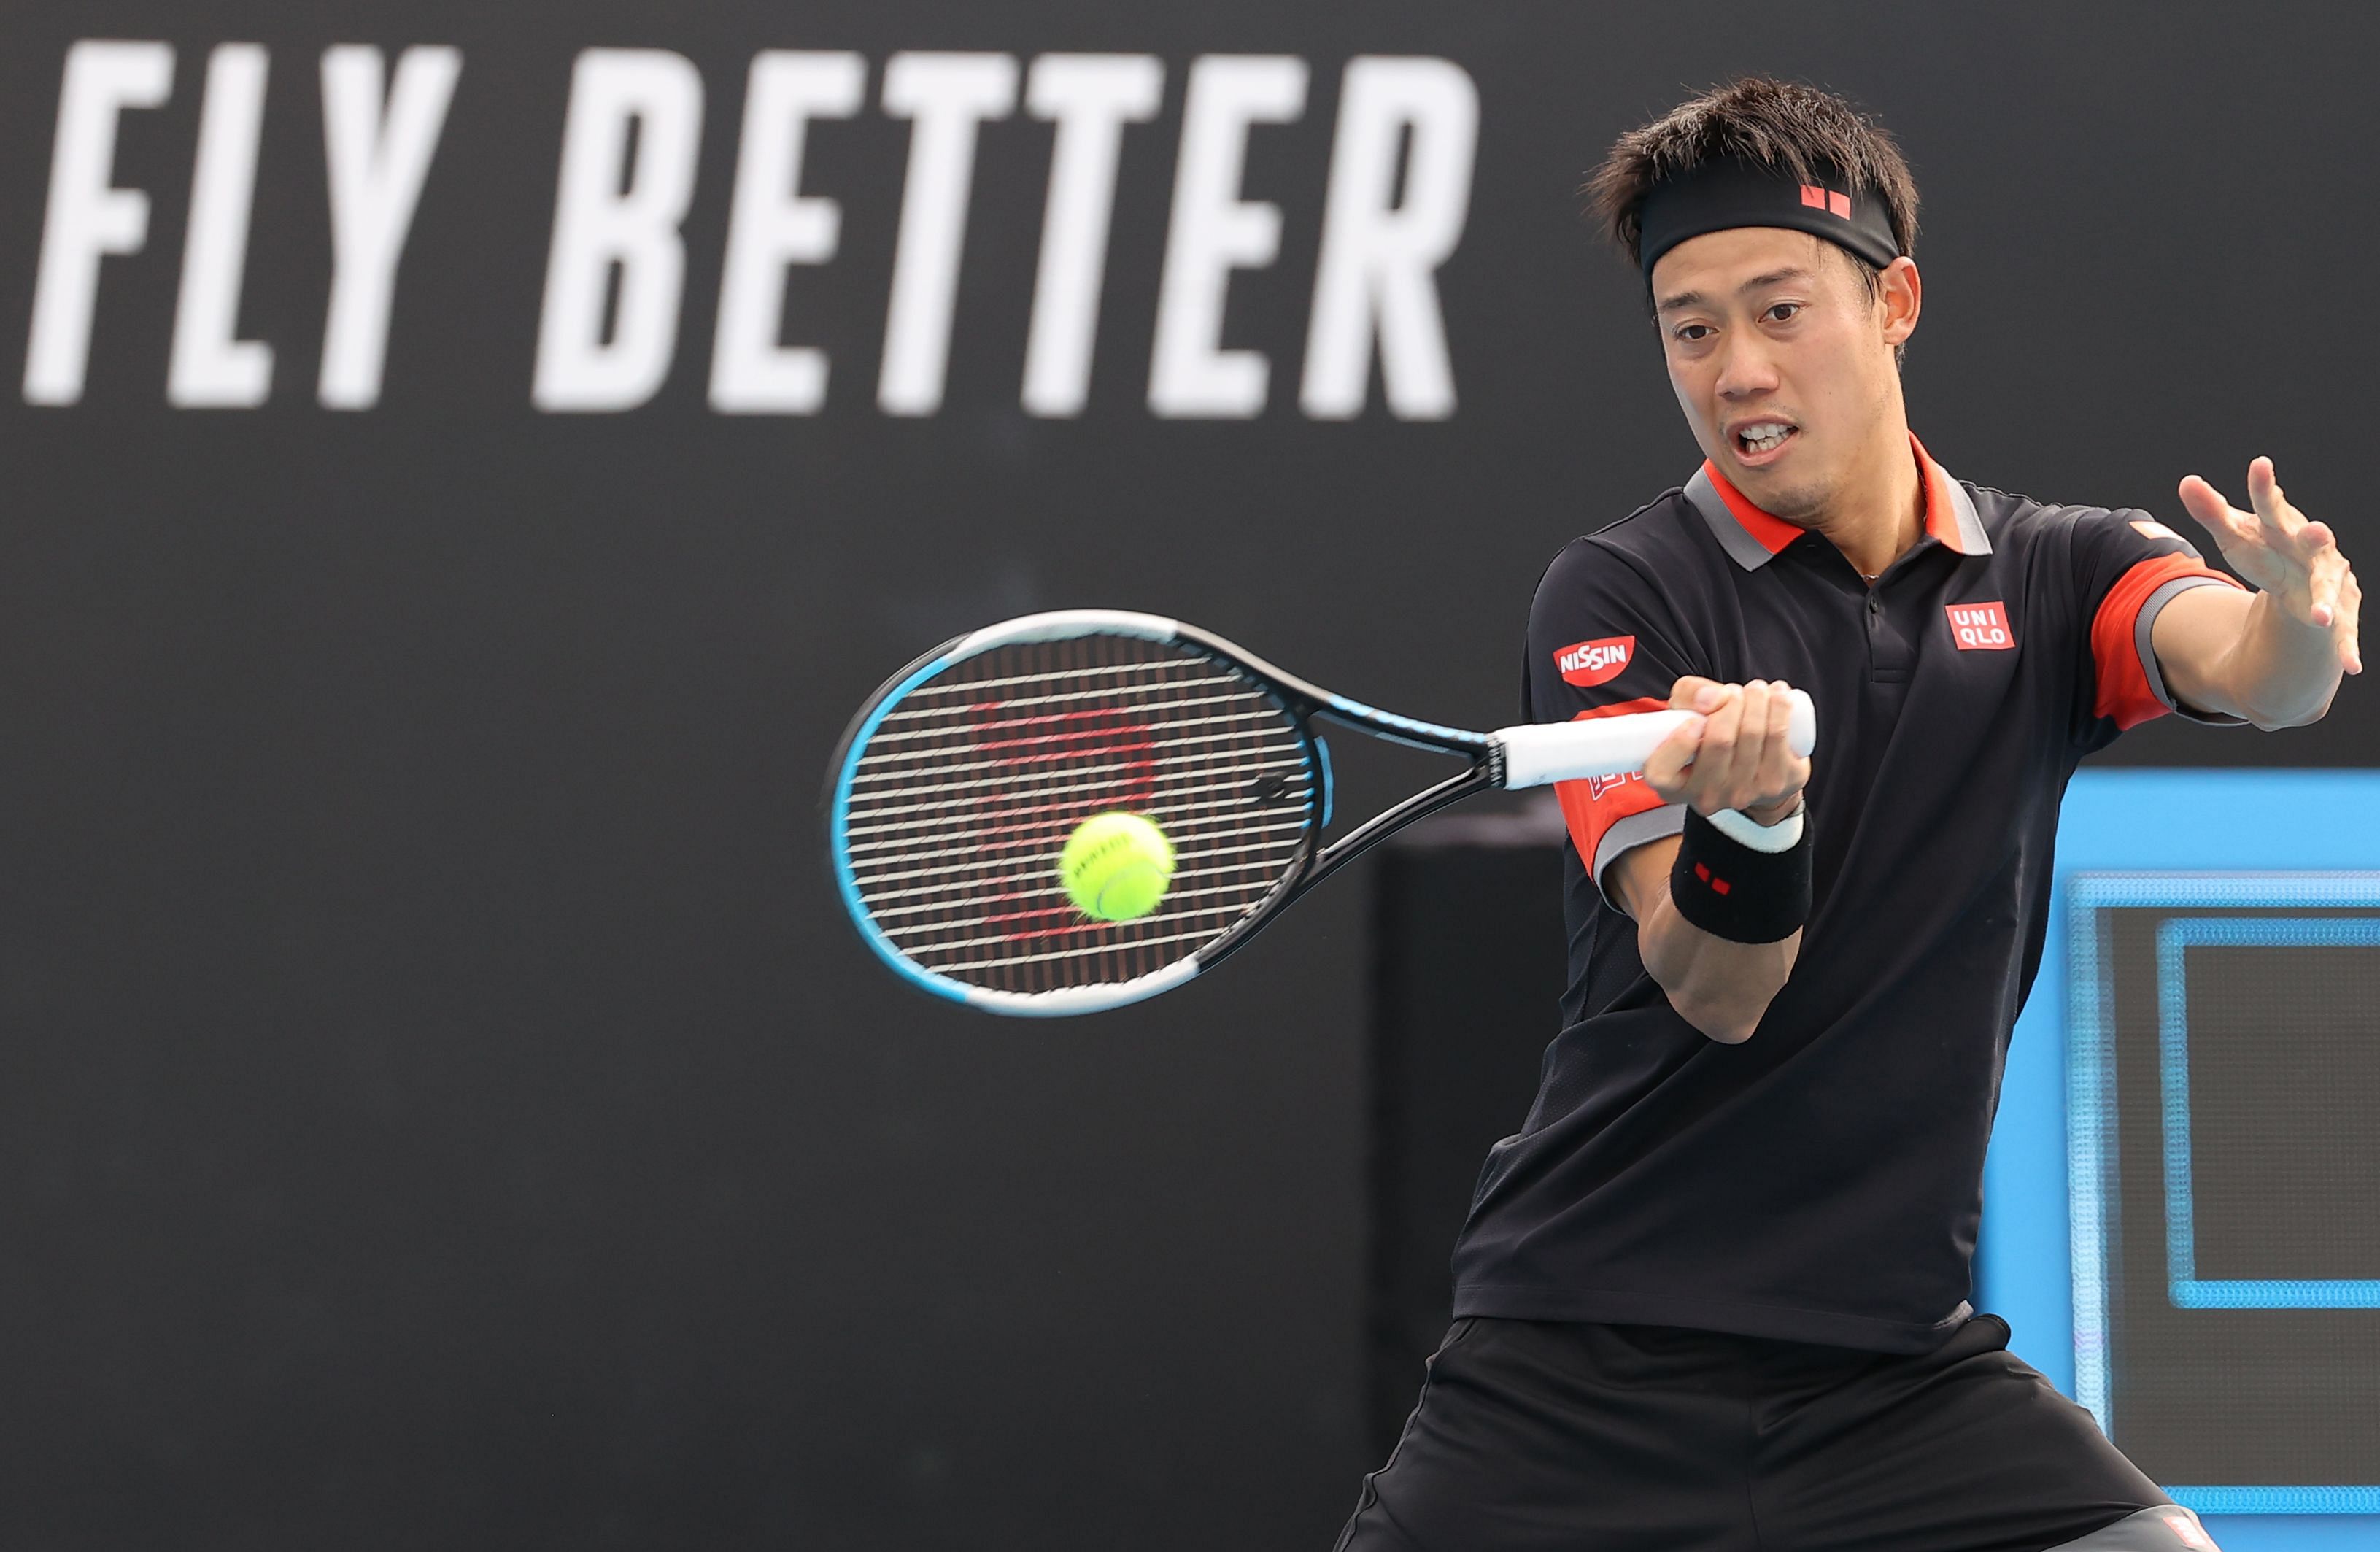 Japan's Kei Nishikori hits a return against Spain's Pablo Carreno Busta during their men's singles match on day one of the Australian Open tennis tournament in Melbourne on February 8, 2021. Credit: AFP